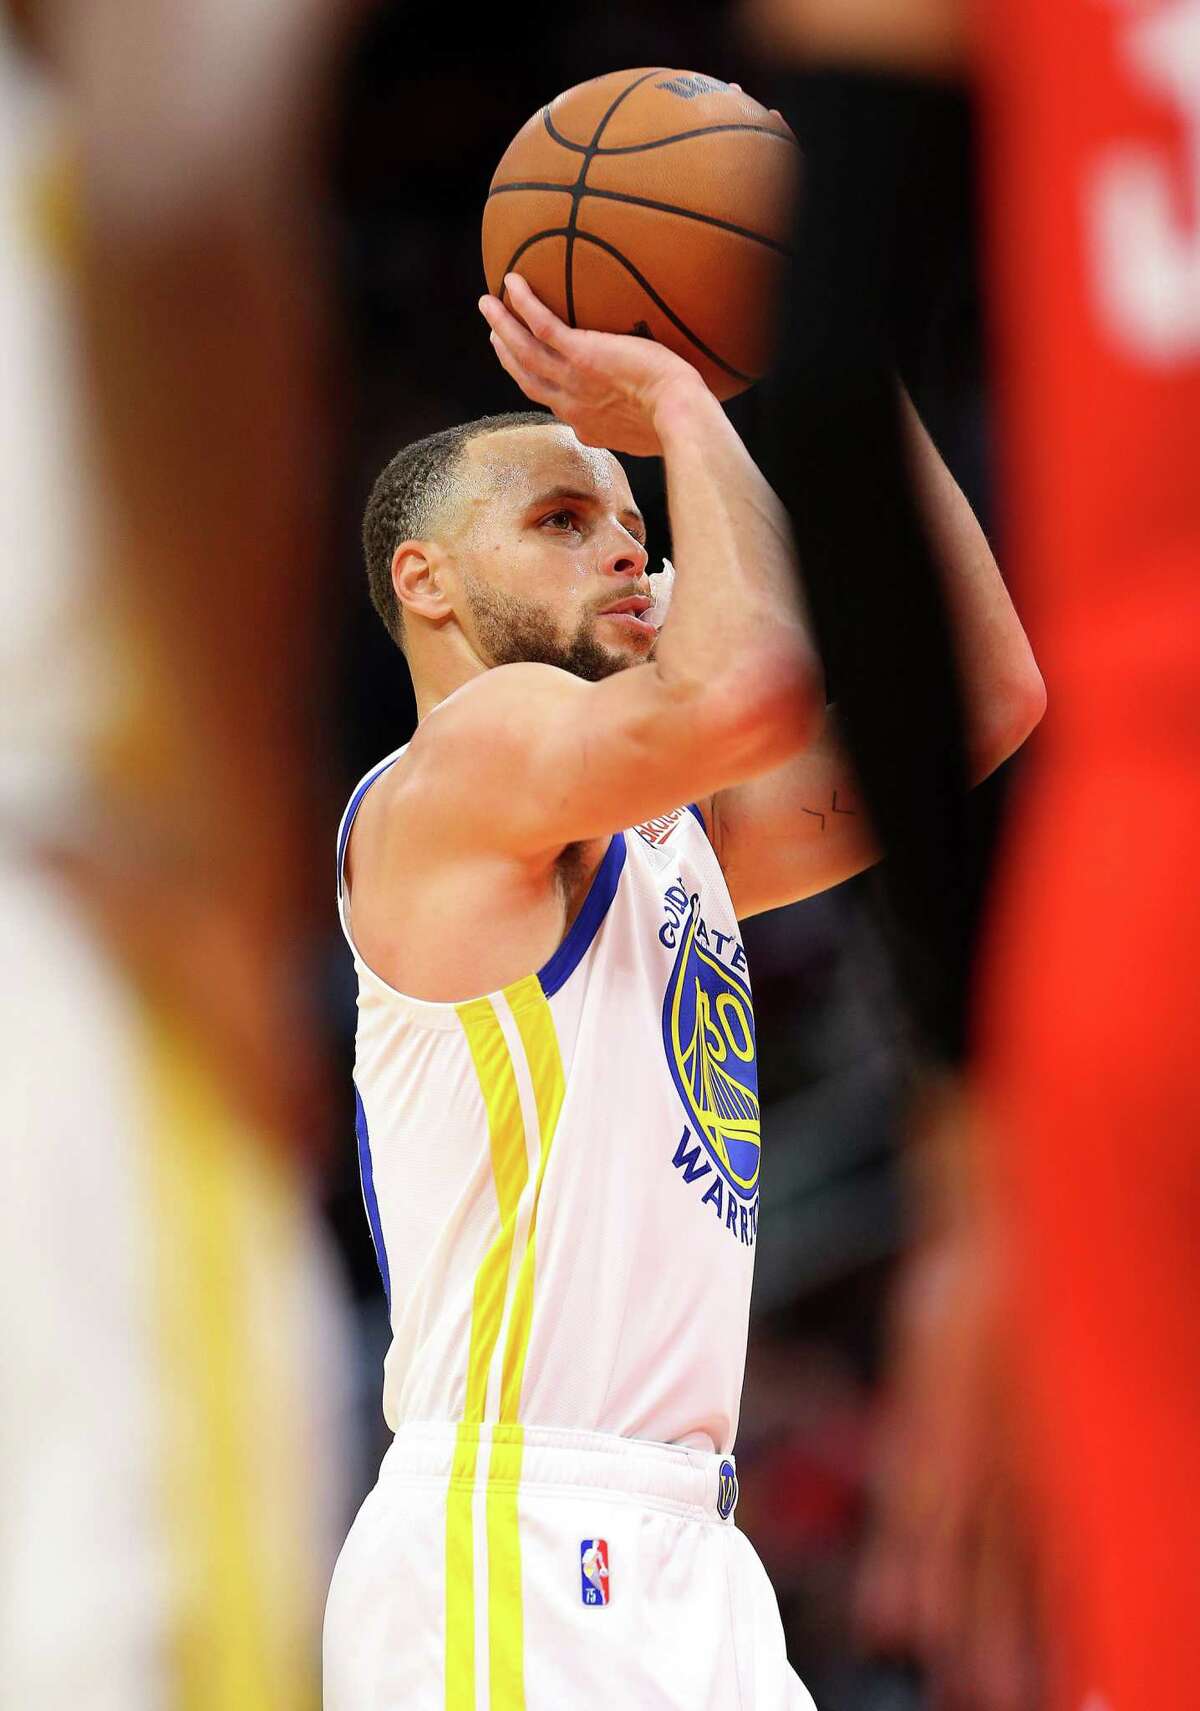 The Warriors’ Stephen Curry shoots a free throw during the fourth quarter against the Houston Rockets at Toyota Center on January 31, 2022 in Houston, Texas.